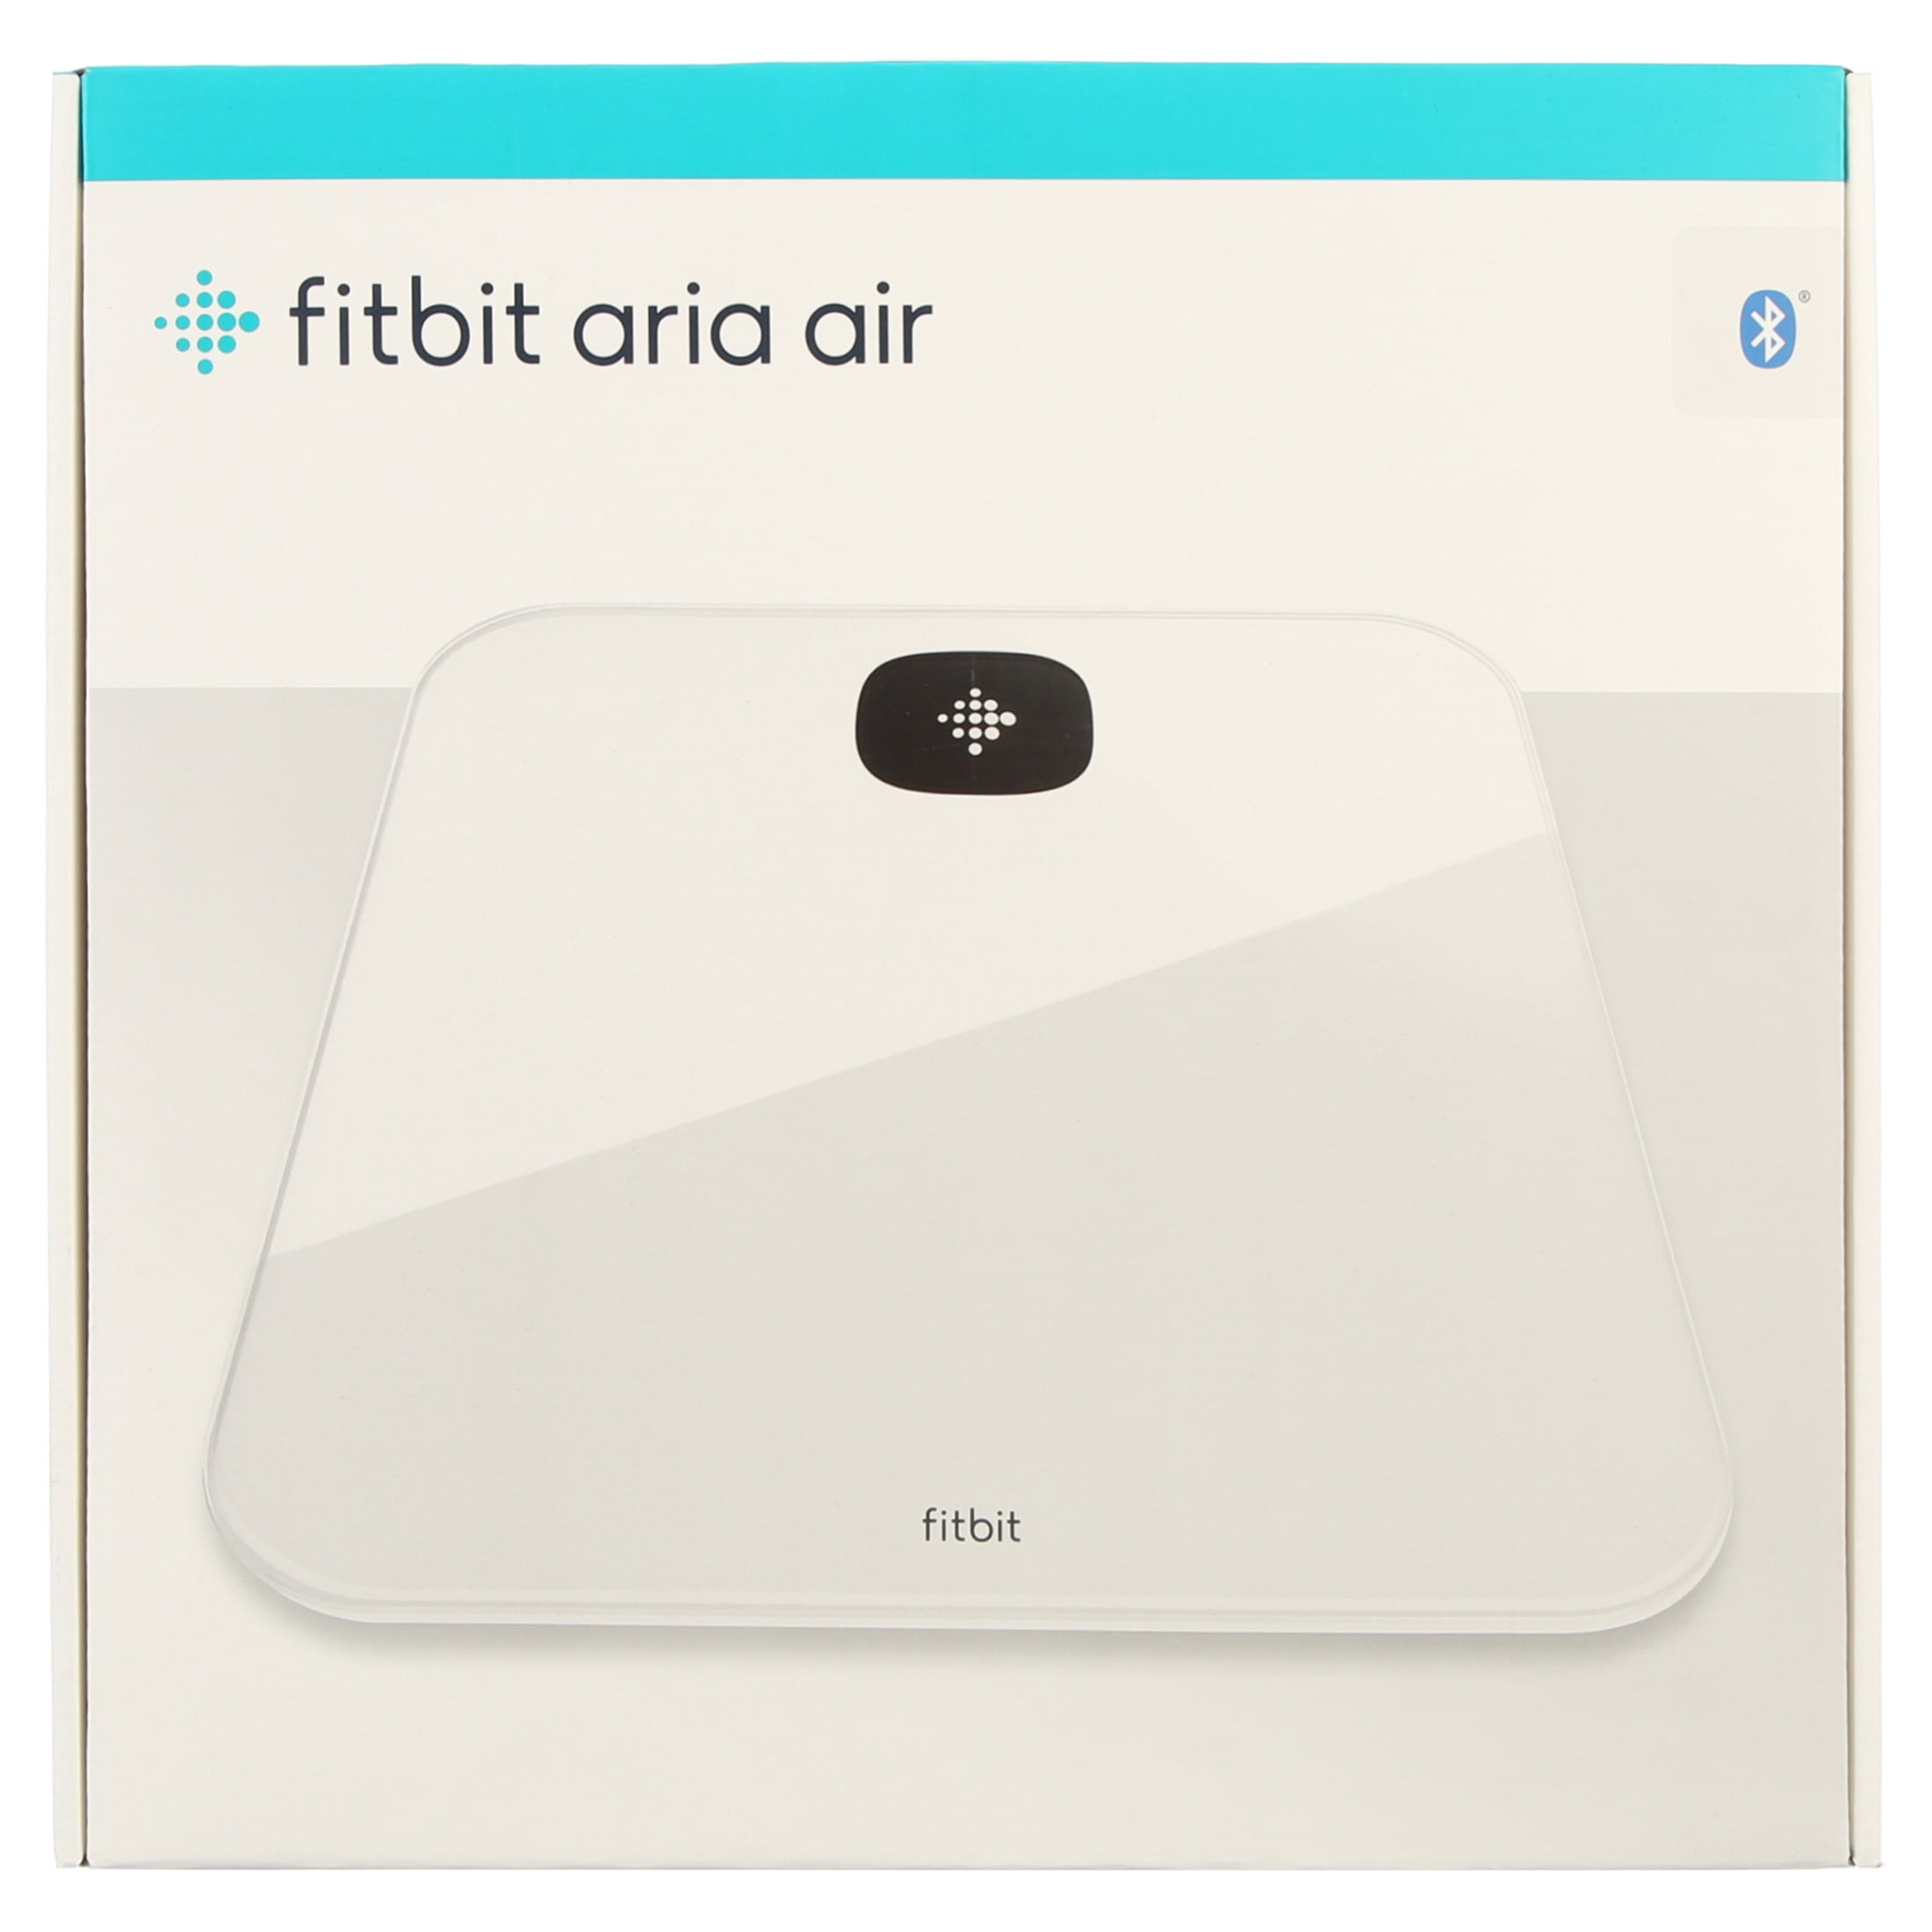 Fitbit Aria Air Review: Smart-Looking, But Lacking Smarts